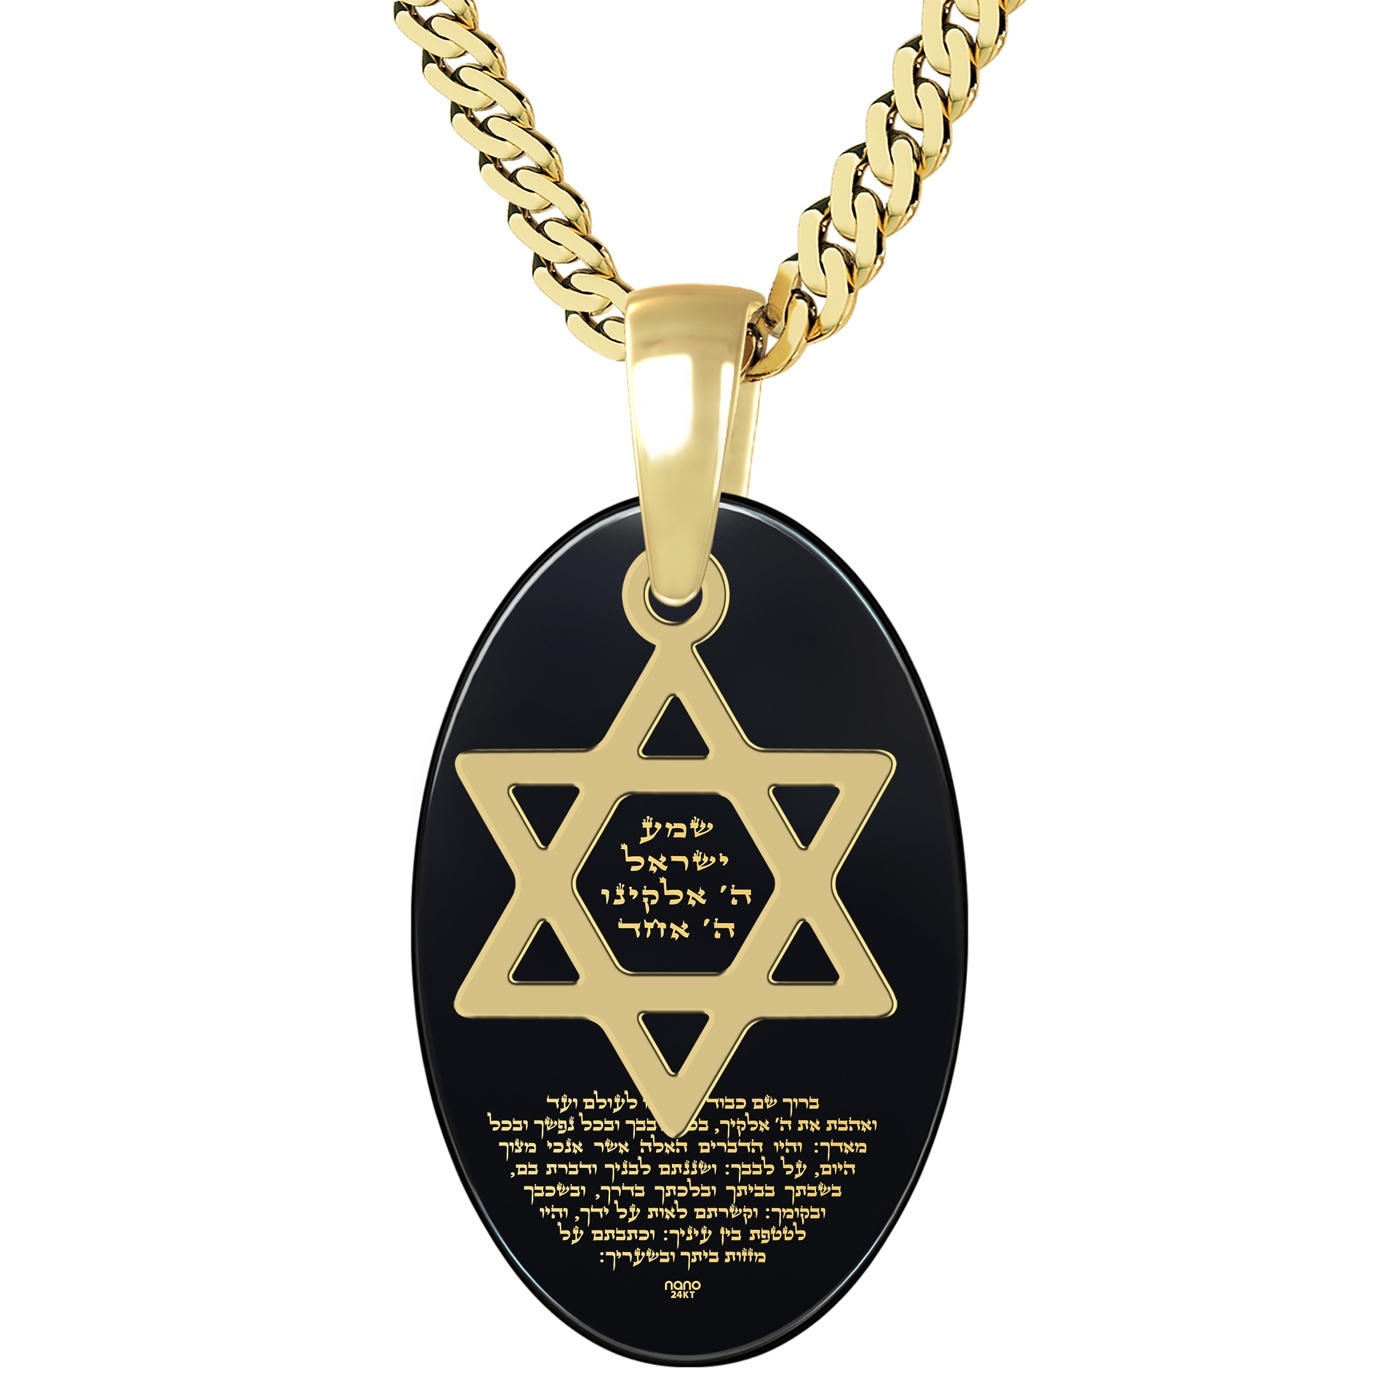 24K Gold Plated and Onyx Oval Necklace with Star of David Necklace and Micro-Inscribed Shema Yisrael (Deuteronomy 6:4-9) - 3